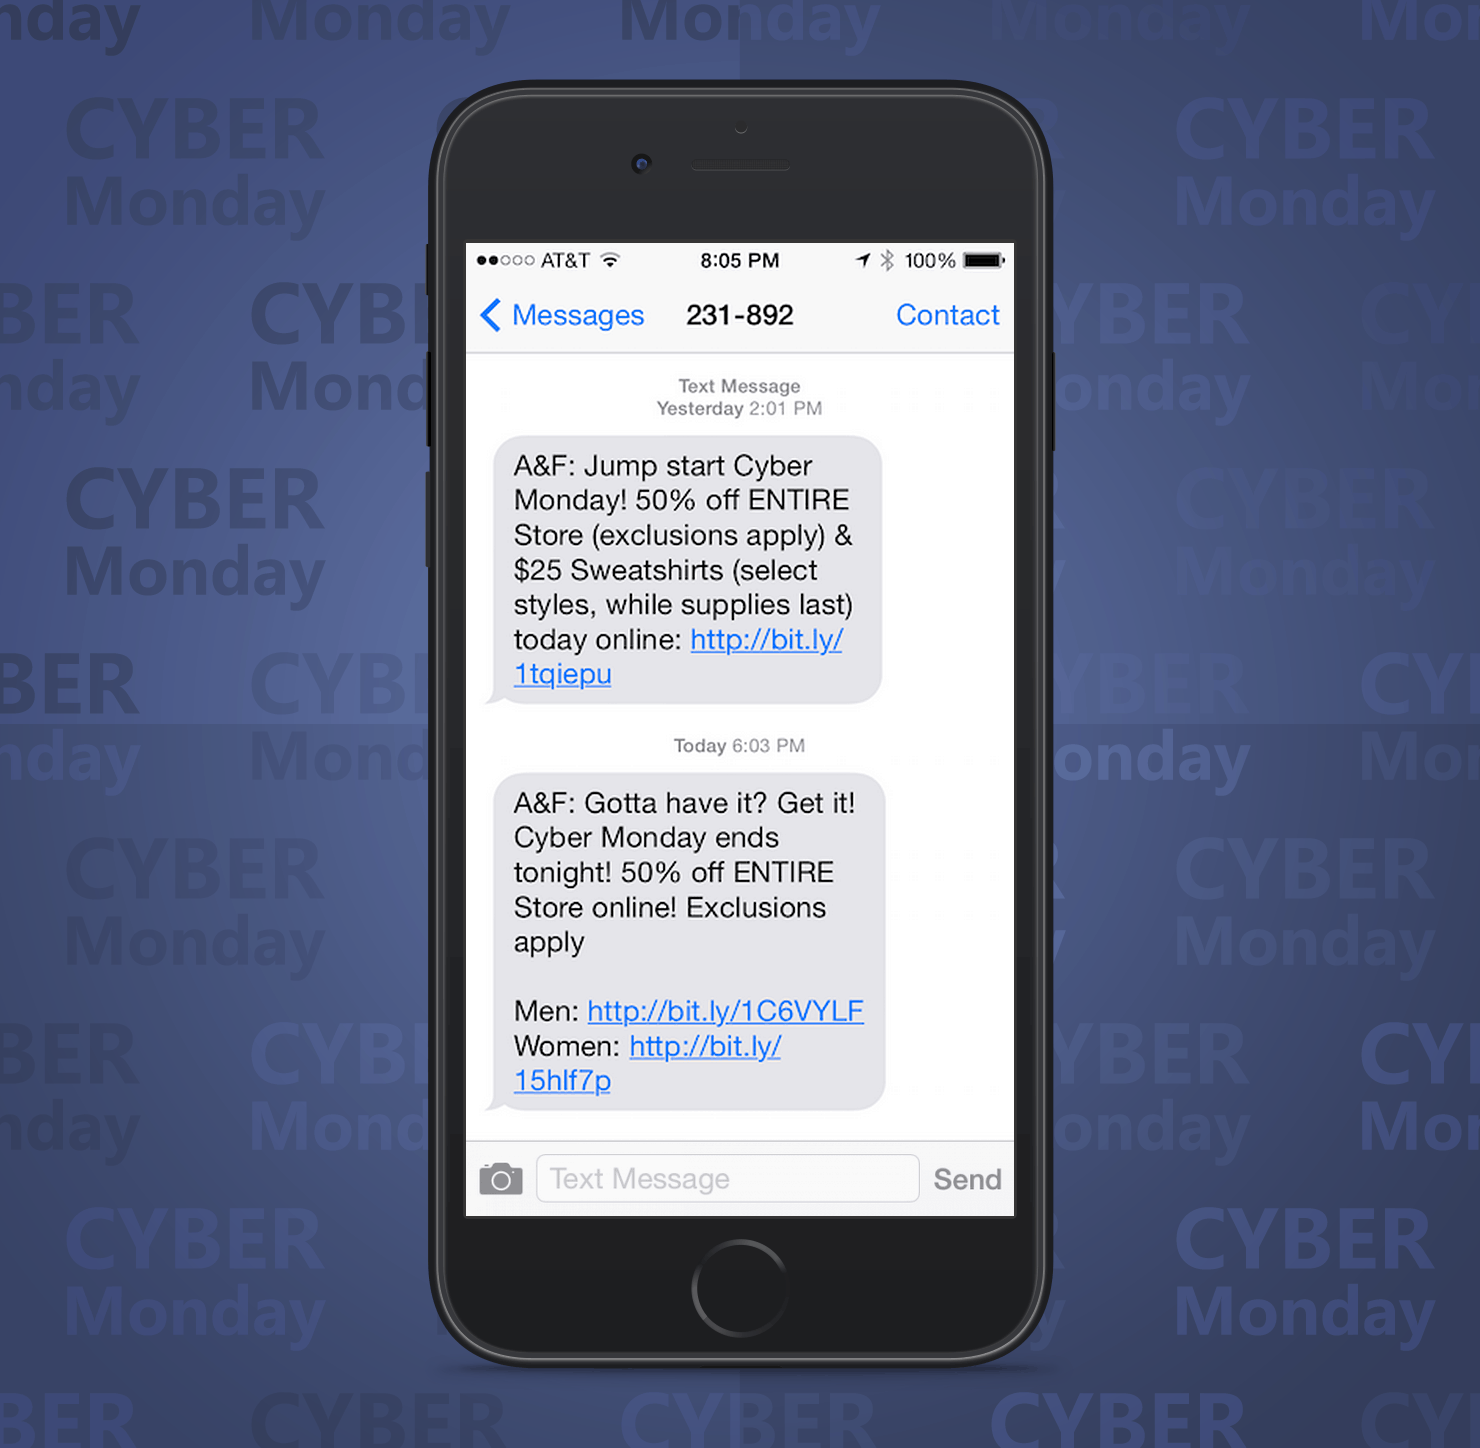 SMS Coupon Example Sent on Cyber Monday From Abercrombie Retail Stores to Customers